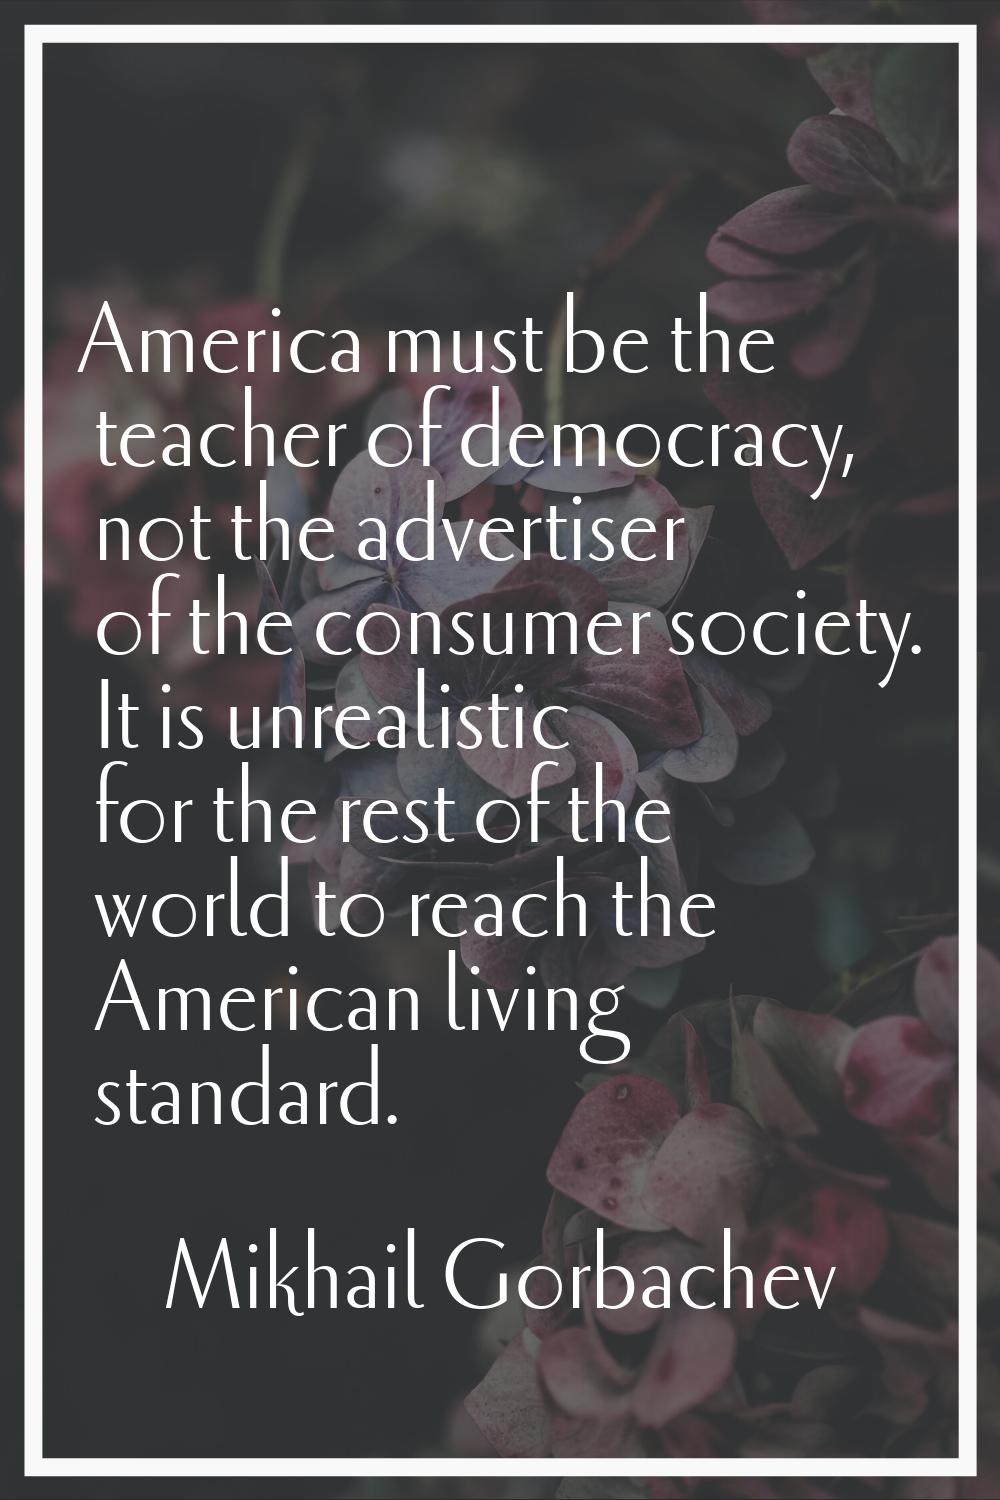 America must be the teacher of democracy, not the advertiser of the consumer society. It is unreali